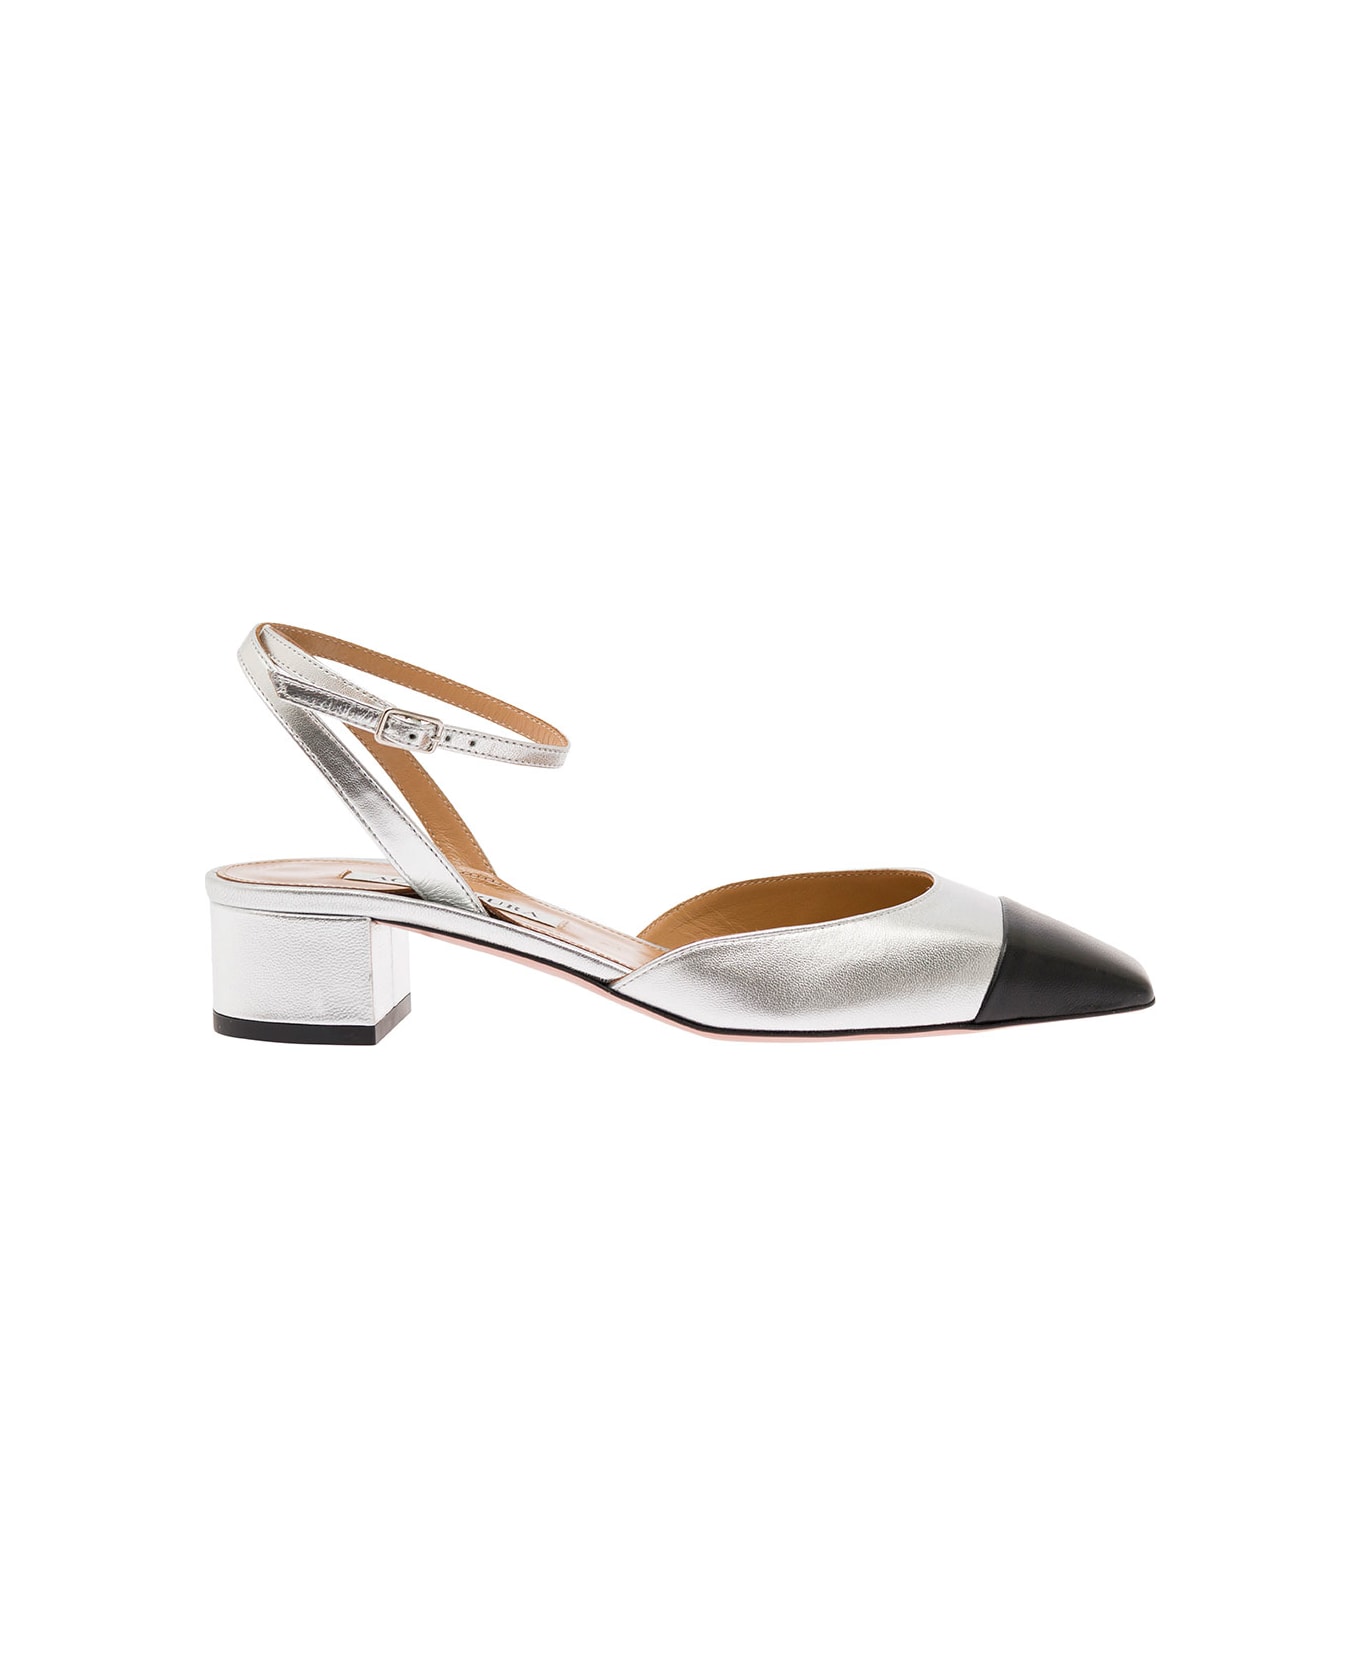 Aquazzura 'french Flirt' Silver-colored Pumps With Contrasting Toe In Laminated Leather Woman - Metallic ハイヒール